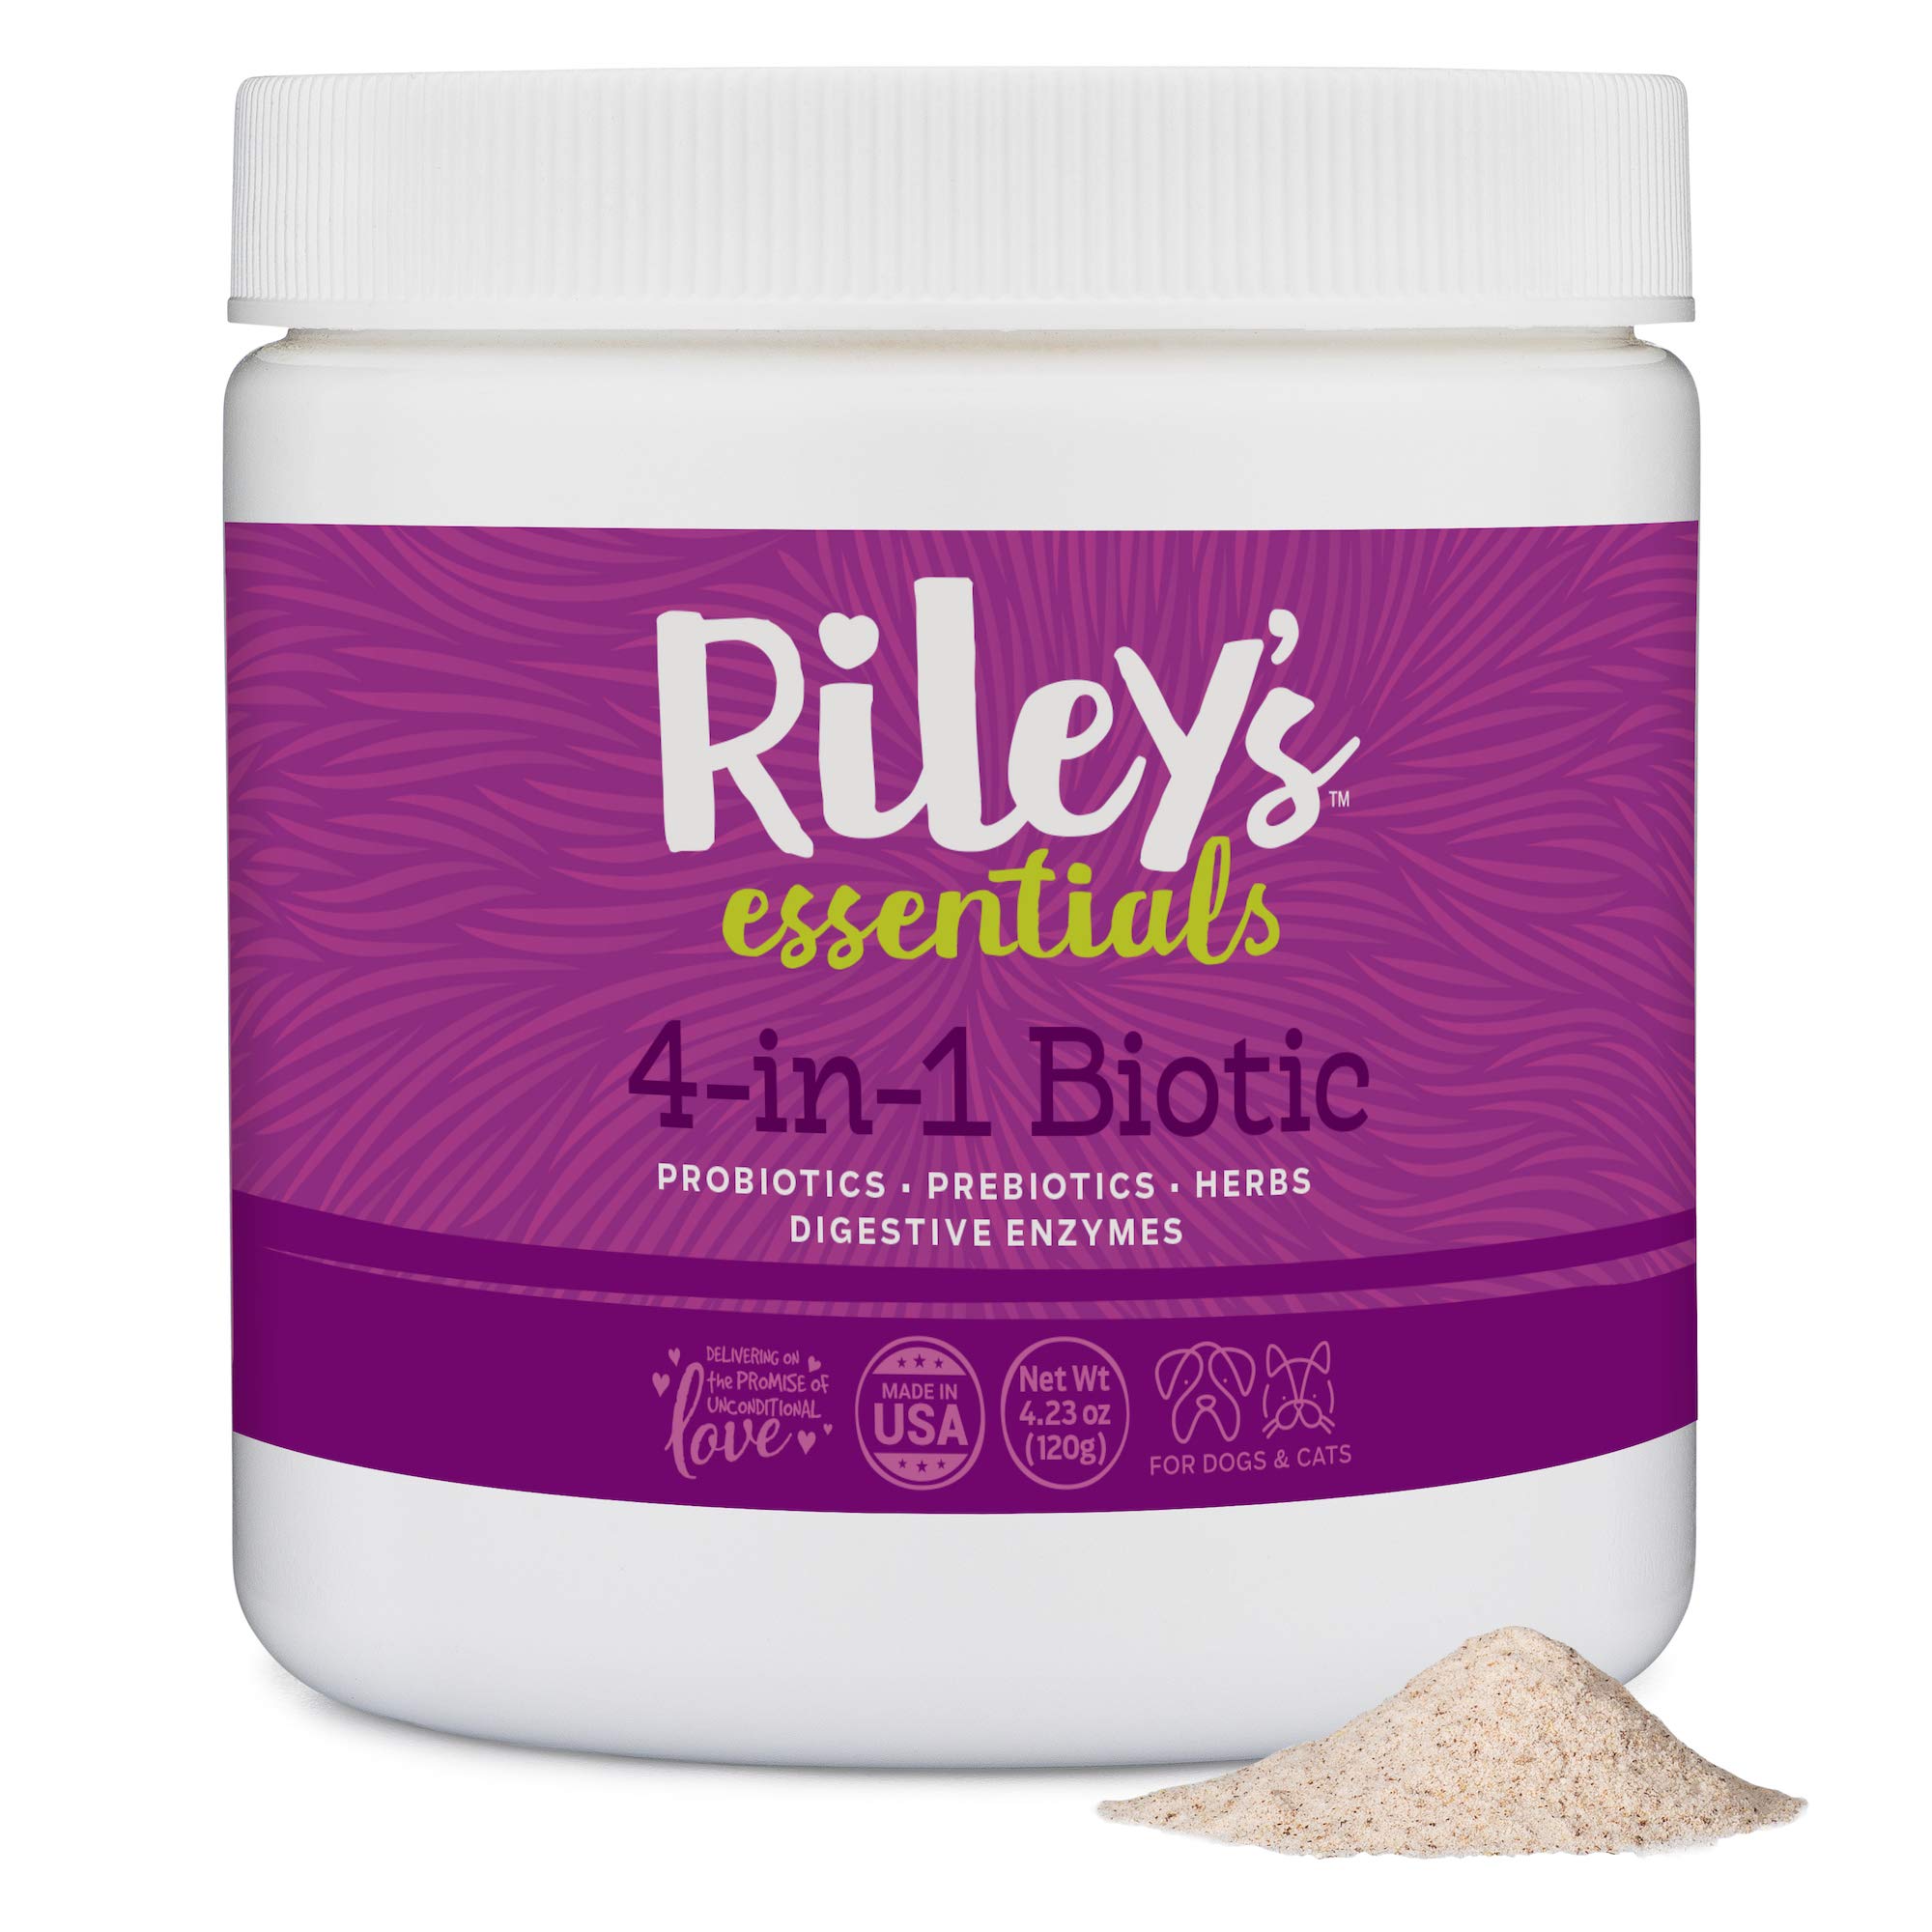 Book Cover Riley's Probiotics for Dogs - 4-in-1 Biotic for Dogs & Cats - Probiotics, Digestive Enzymes, Prebiotics, and Herbs - Most Complete Canine Probiotics Supplements for Dogs - 4.23oz Powder